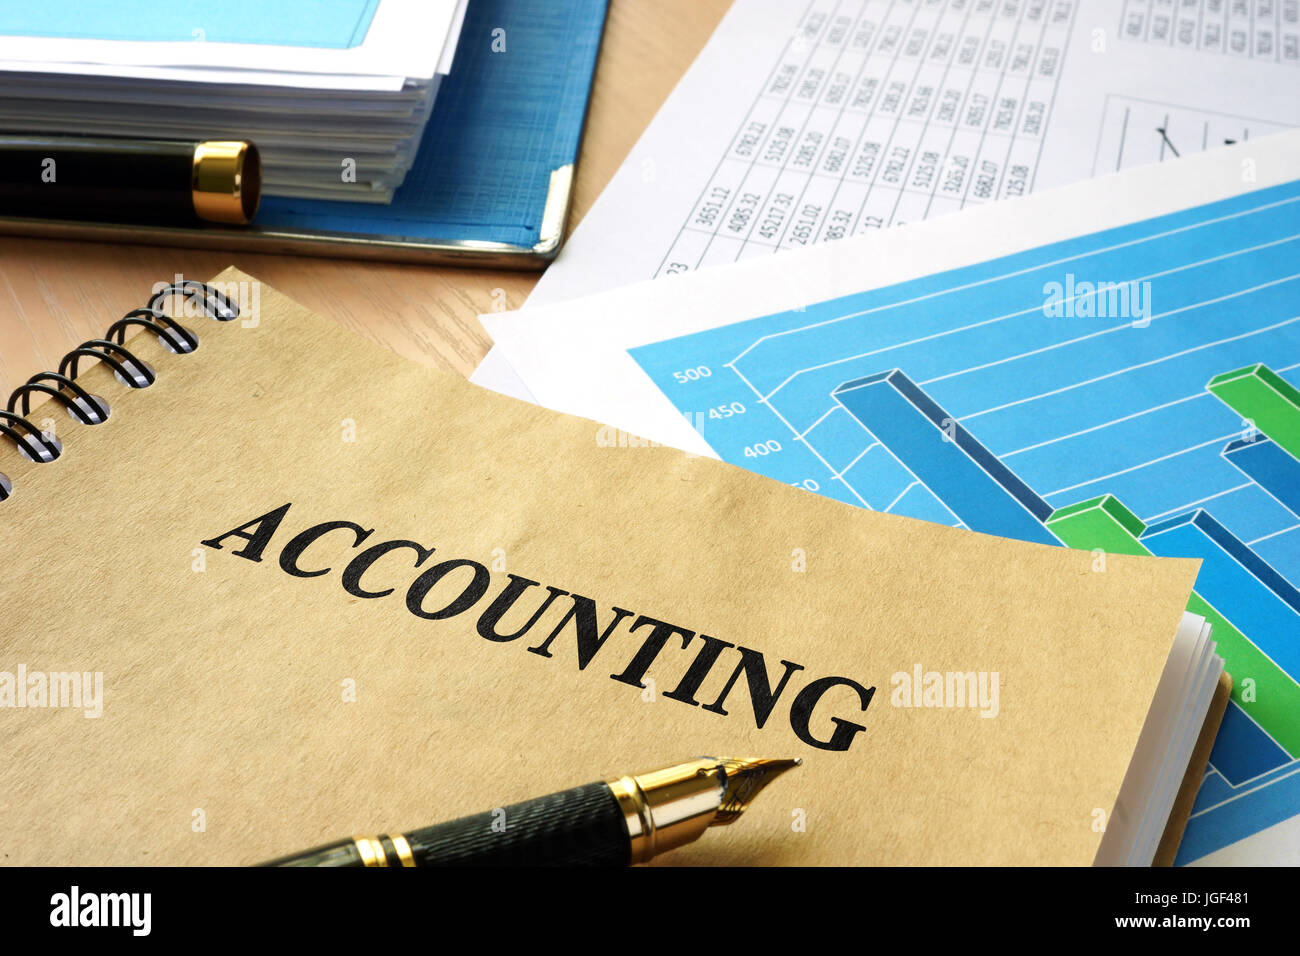 Book with title Accounting. Budget balance concept. Stock Photo